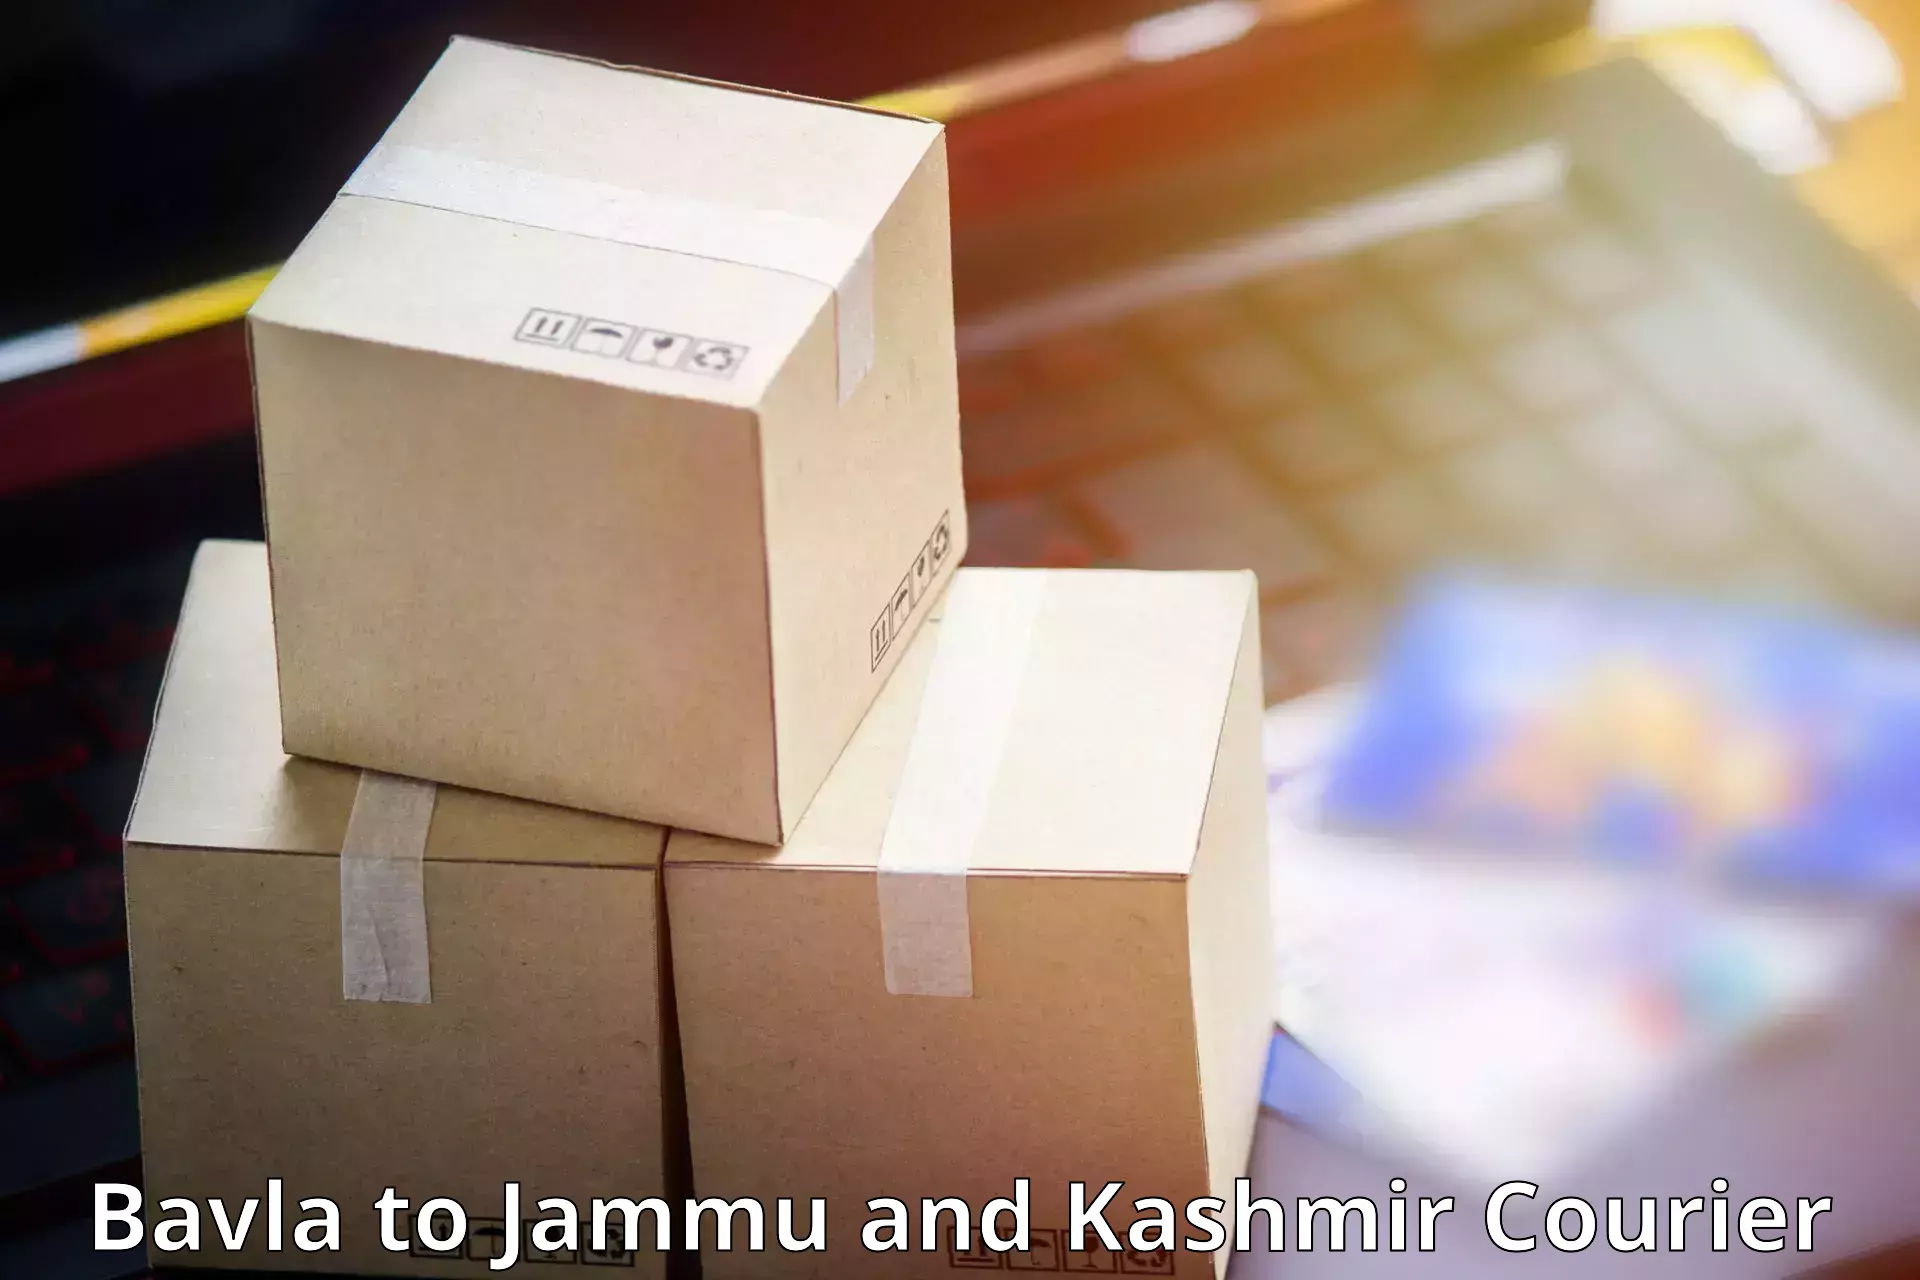 Premium courier services in Bavla to Jammu and Kashmir